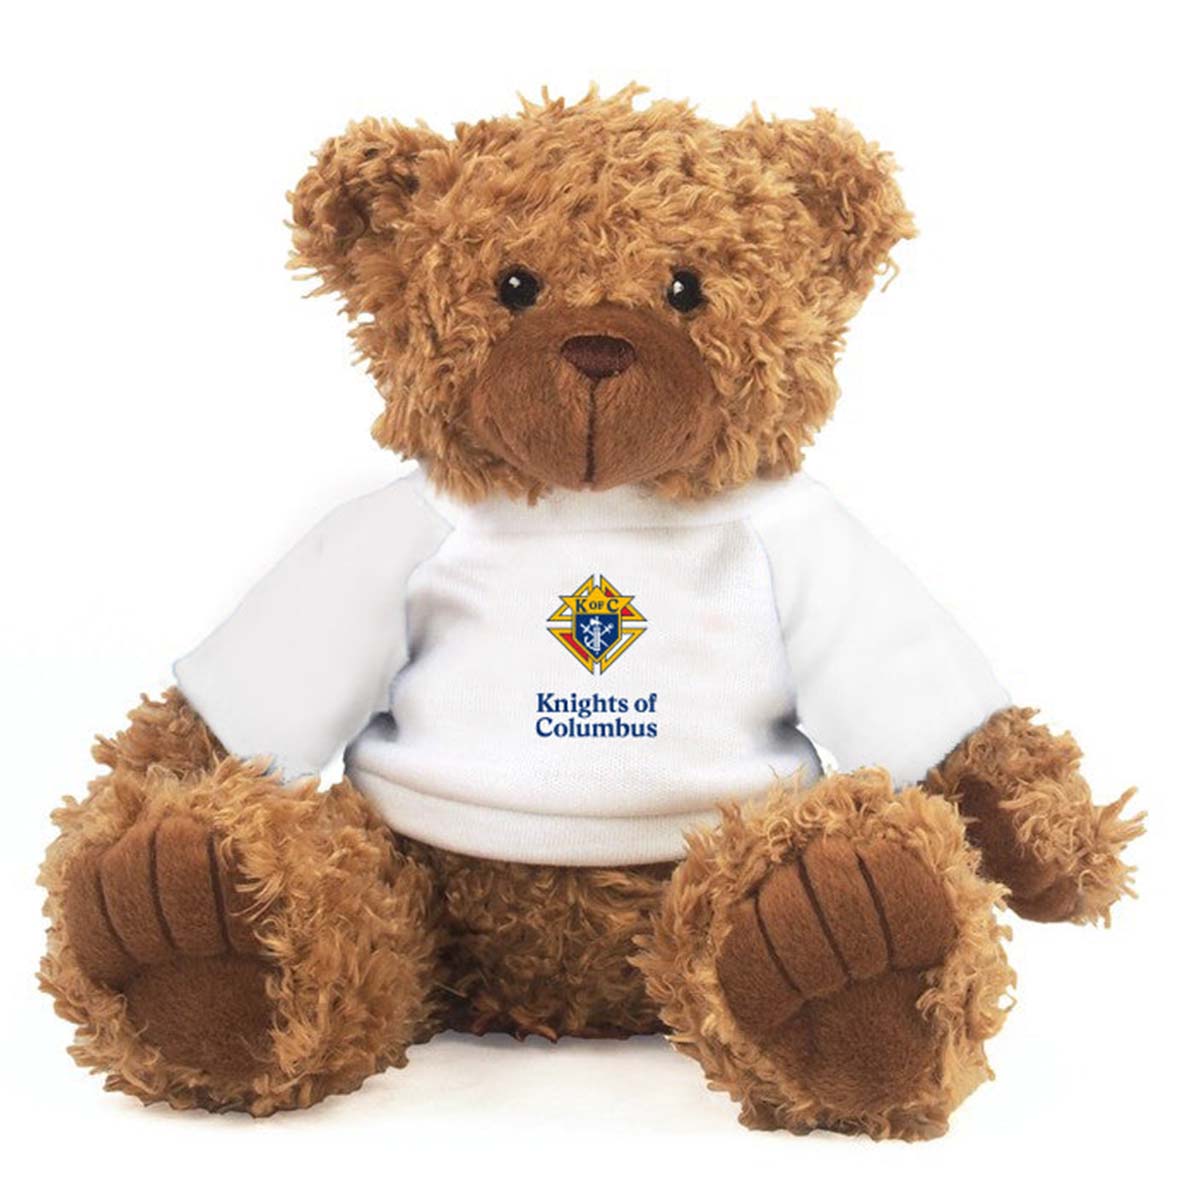 8" Plush Curley Bear with KofC T shirt